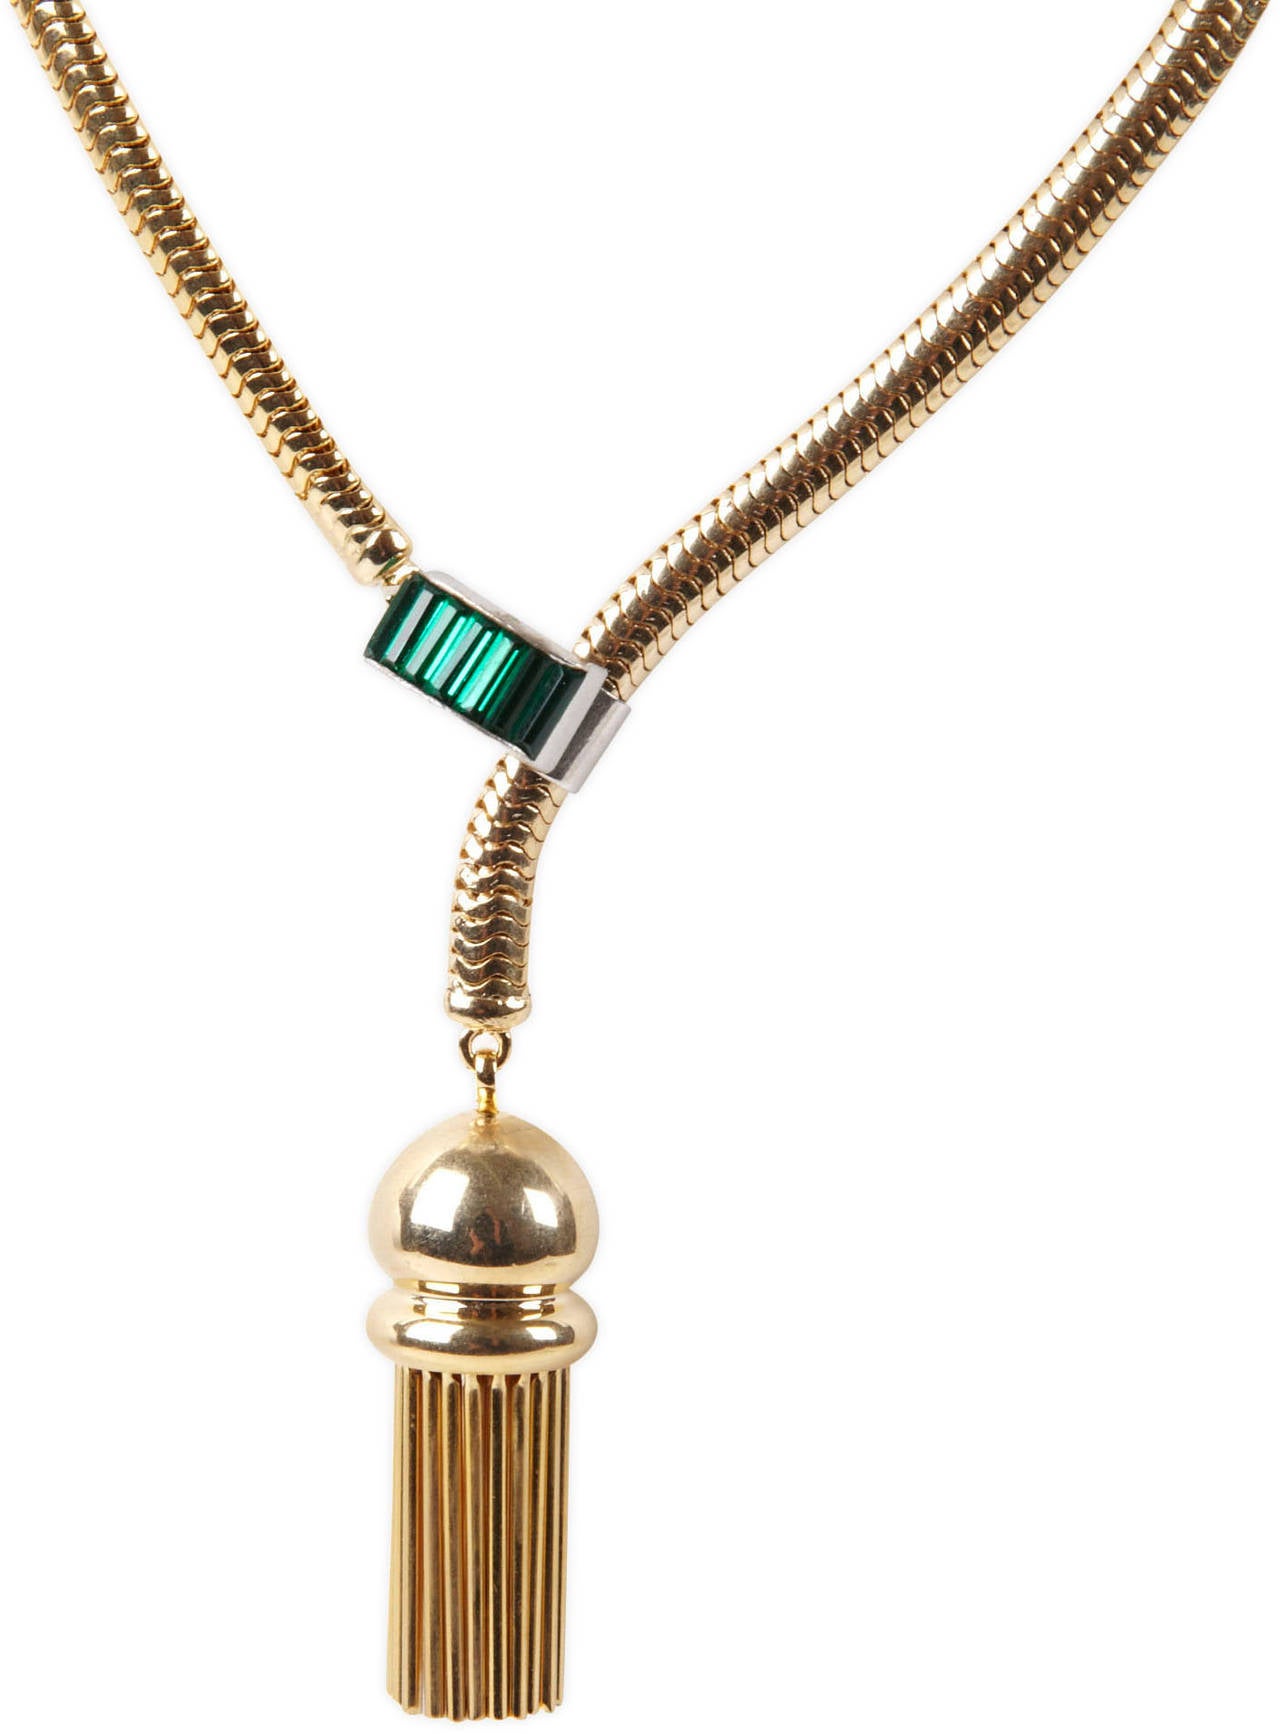 Kriesler Retro Tassel Necklace In Excellent Condition For Sale In New York, NY